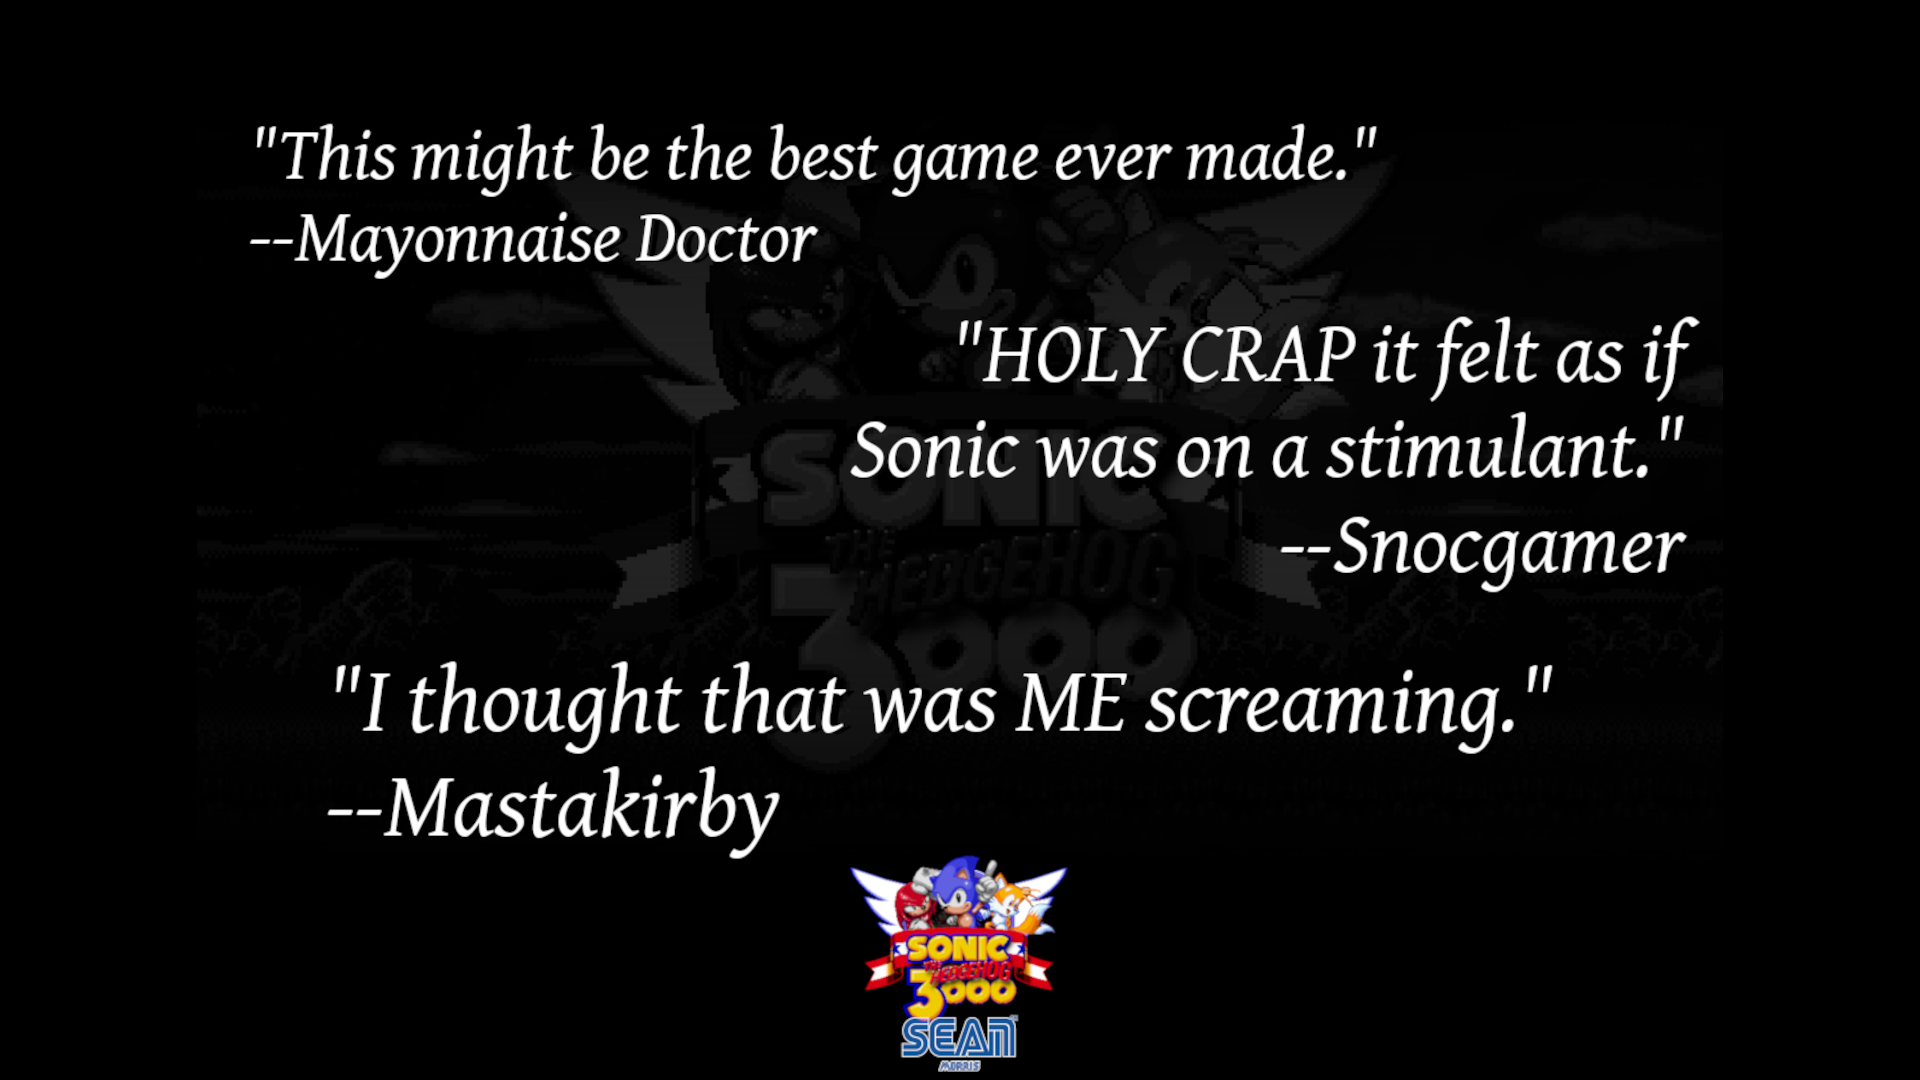 sonic-3000-reviews.png